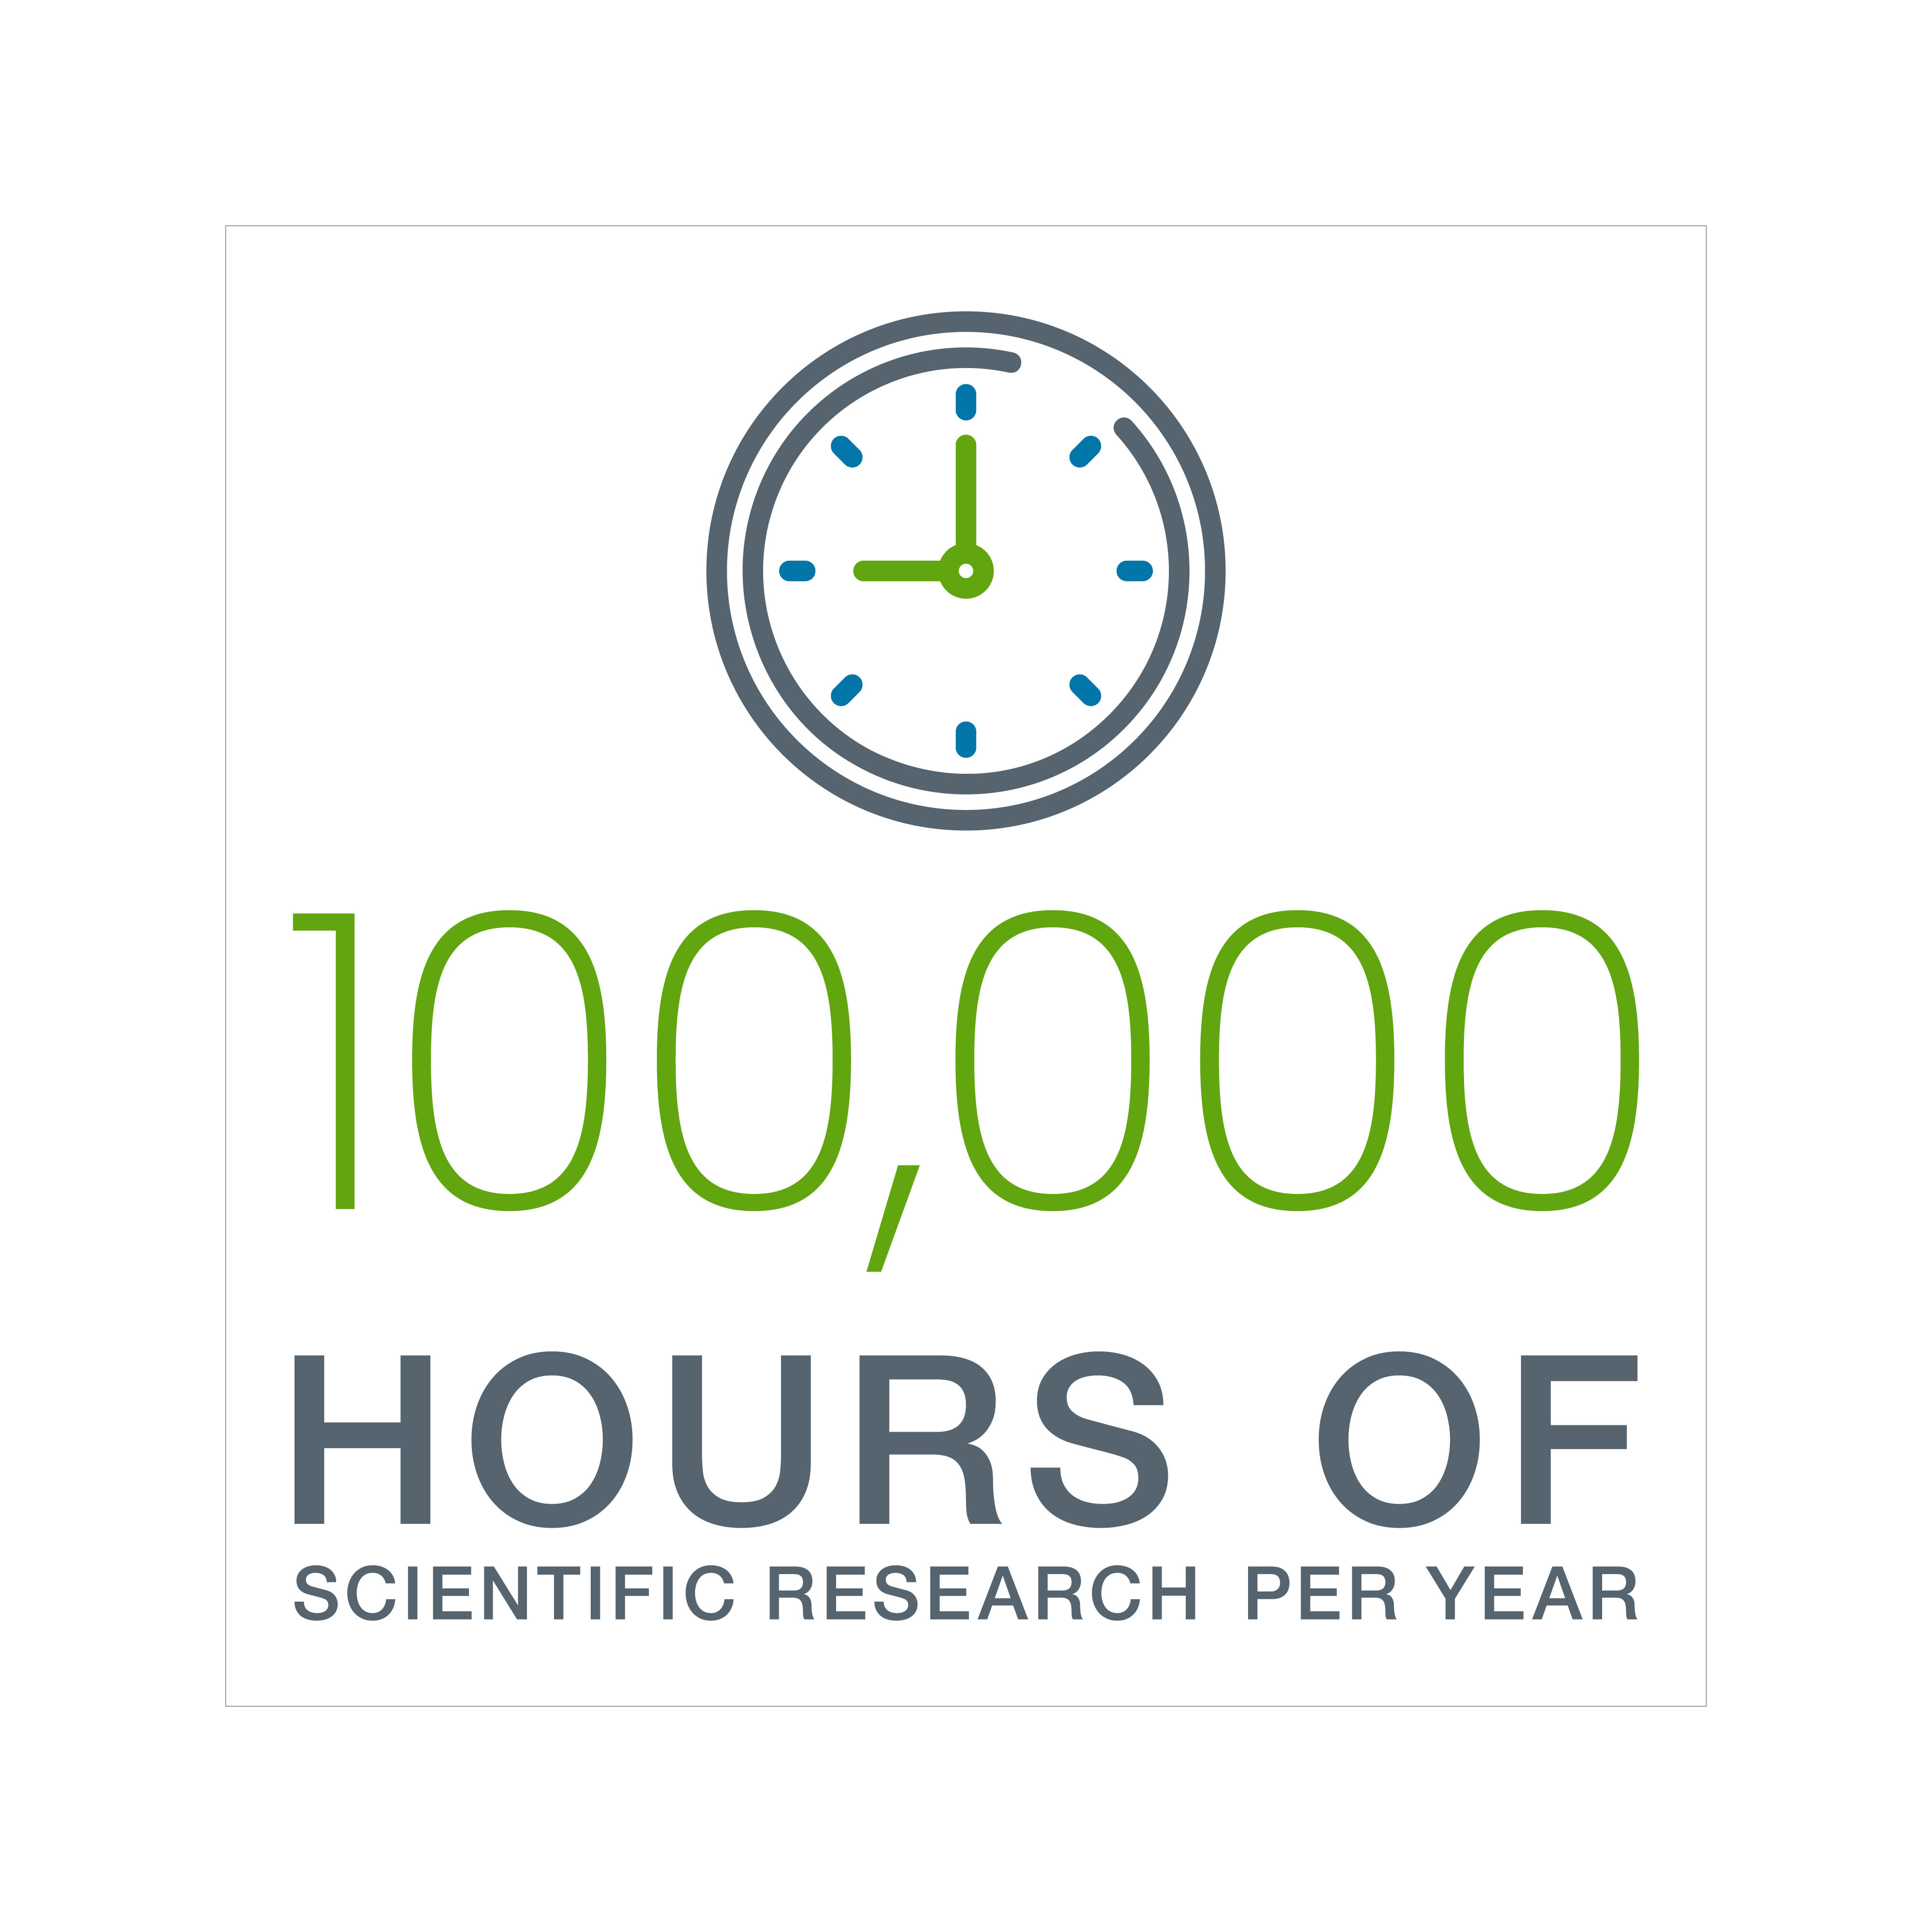 100,000 hours of scientific research per year